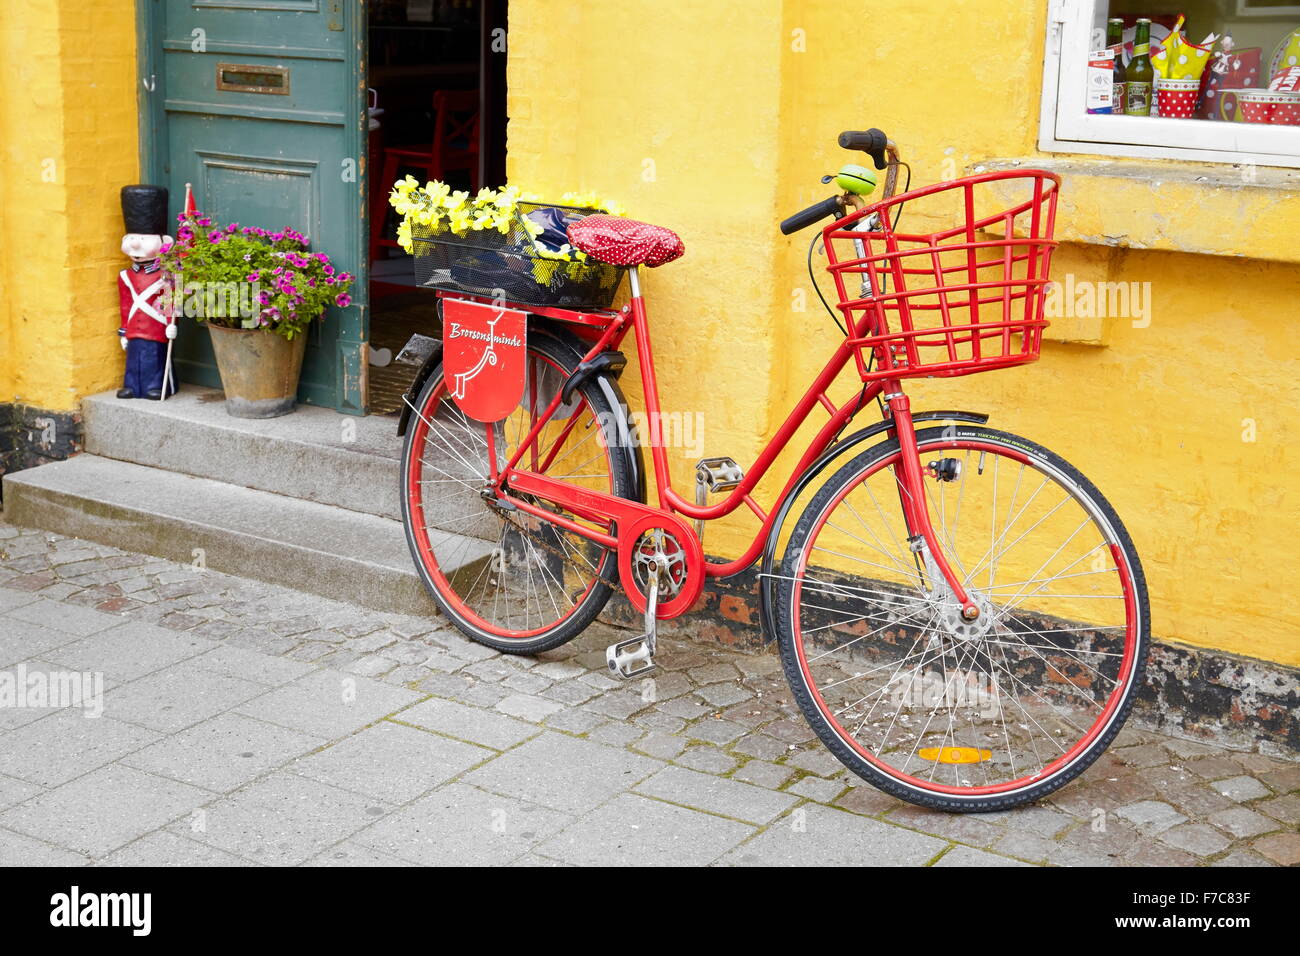 The bicycle on the street of Ribe Old Town, Denmark Stock Photo